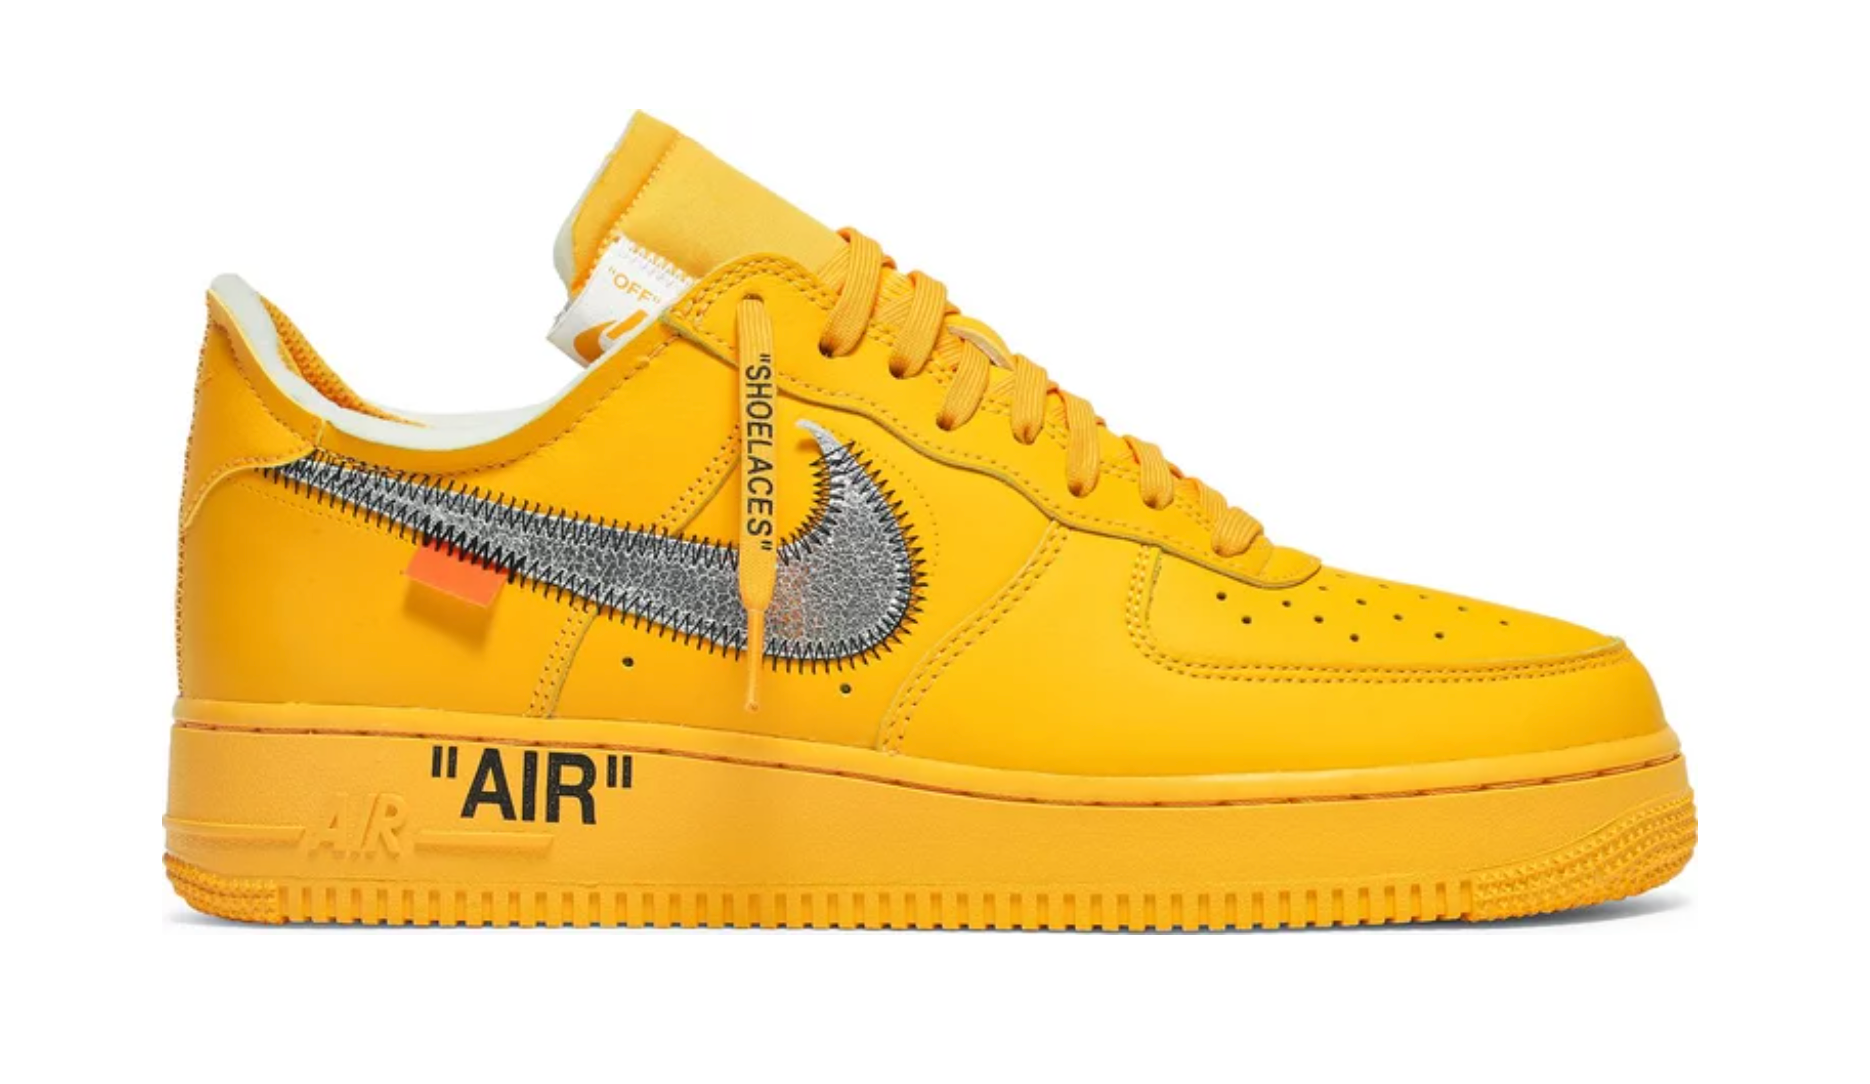 NIKE AIR OFRCE 1 LOW OFF-WHITE UNIVERSITY GOLD METALLIC SILVER - The ...